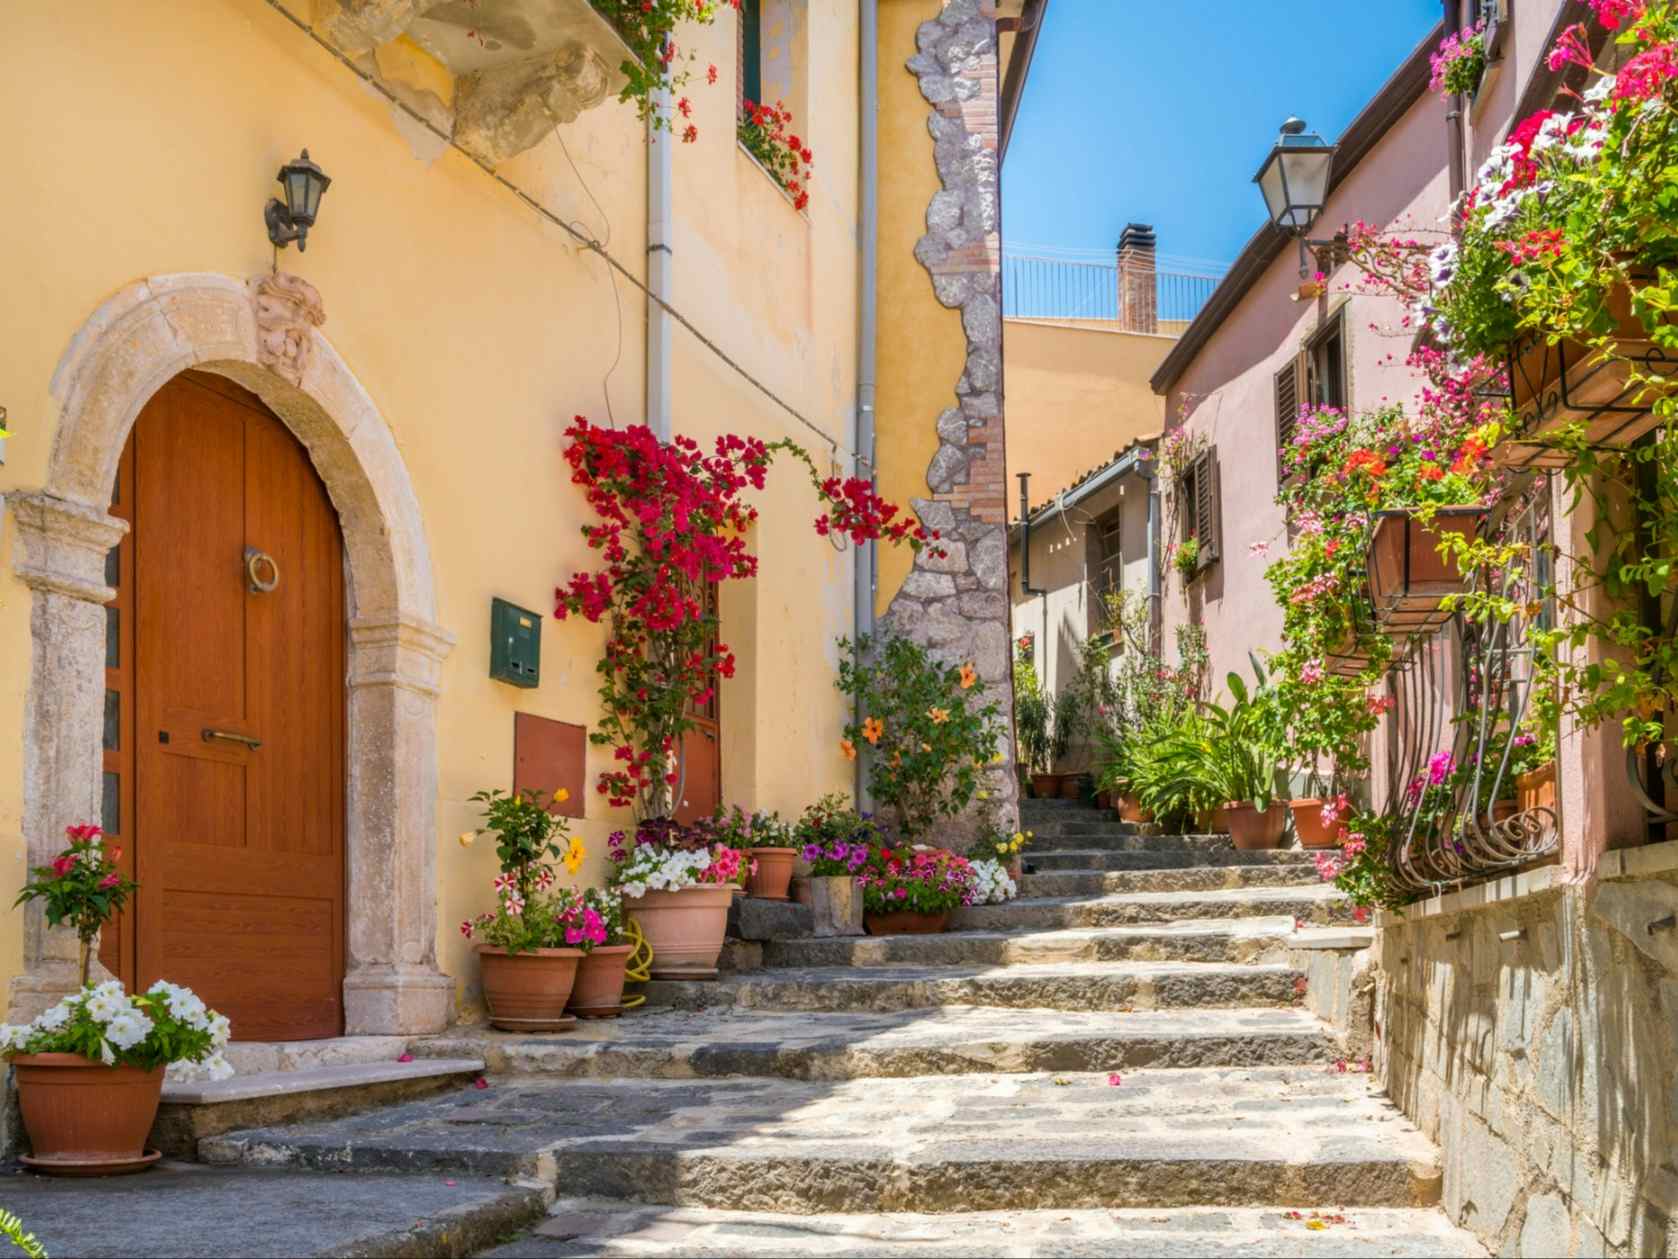 Picturesque town in Sicily. Photo: Getty 1125987368